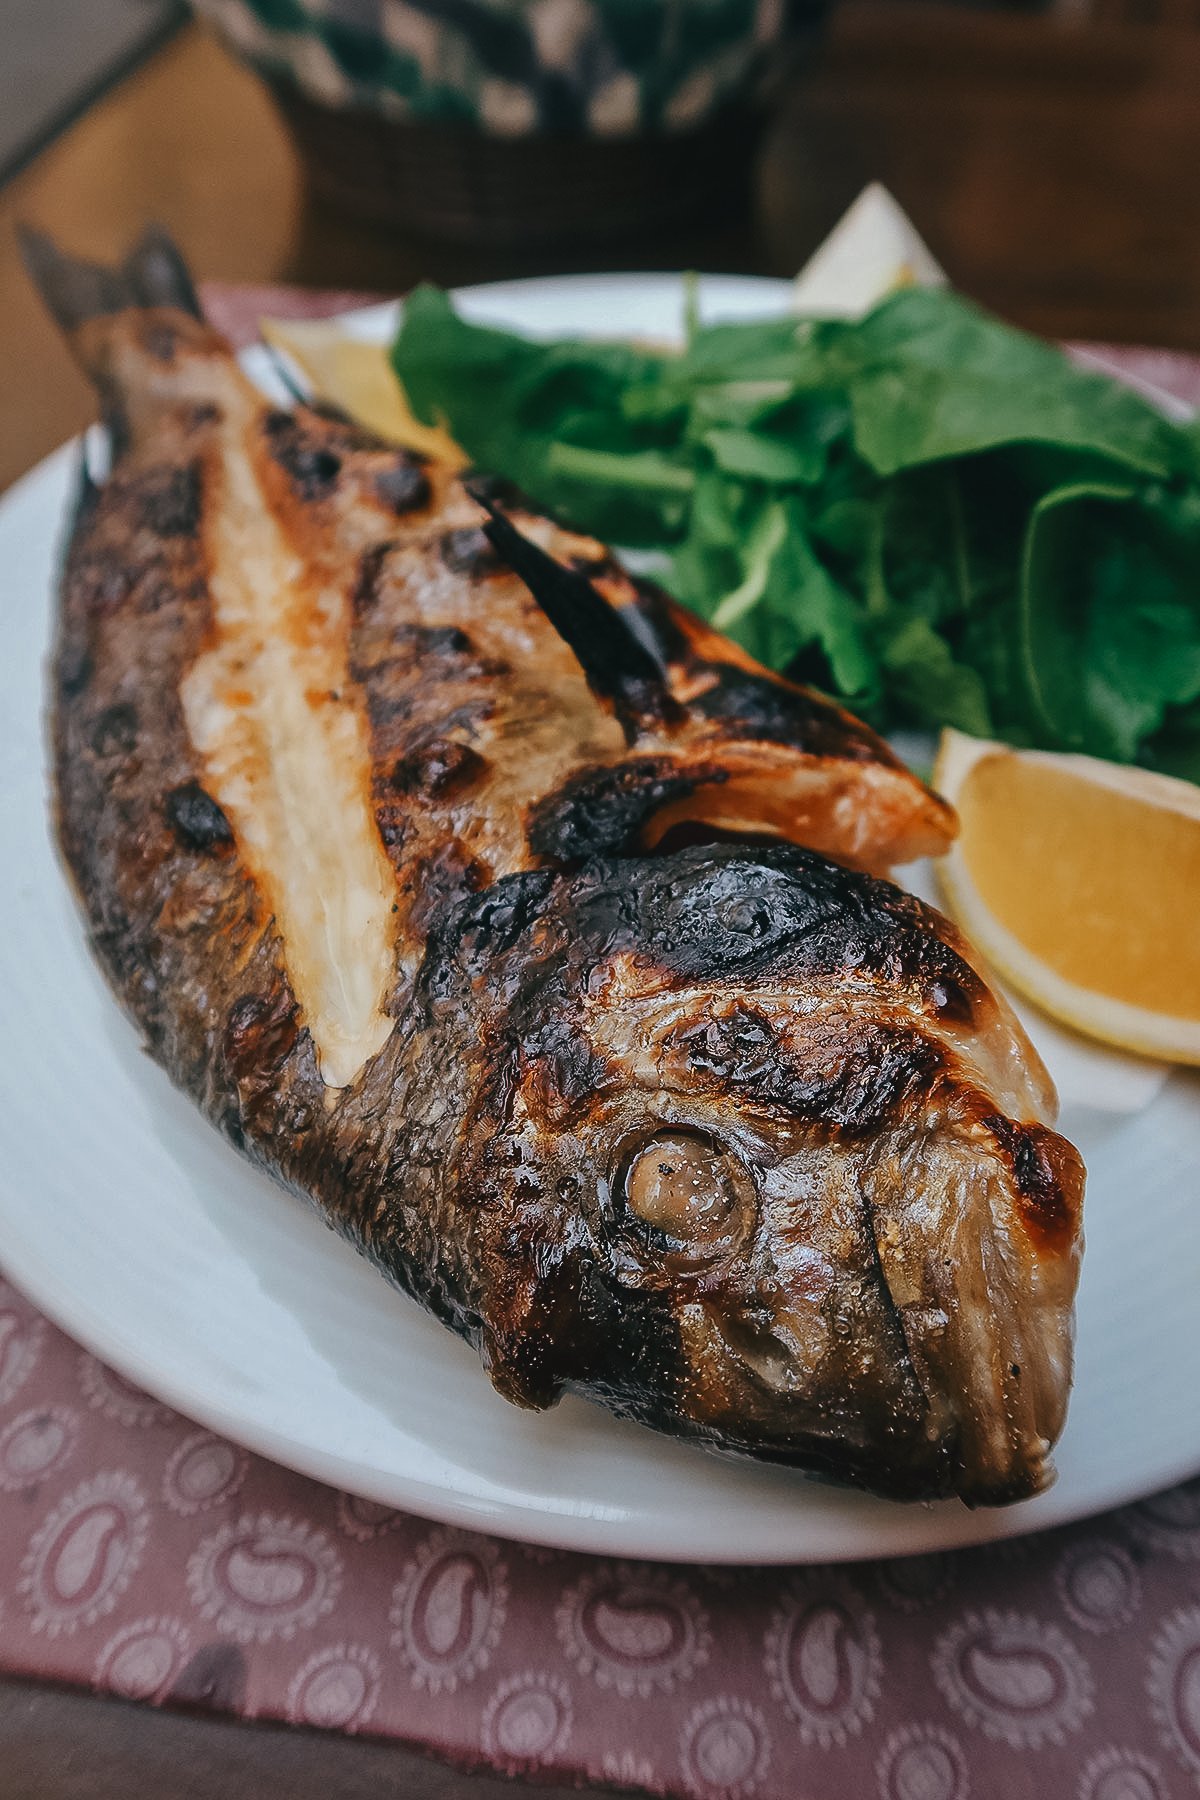 Grilled seabream at a fish restaurant in Istanbul